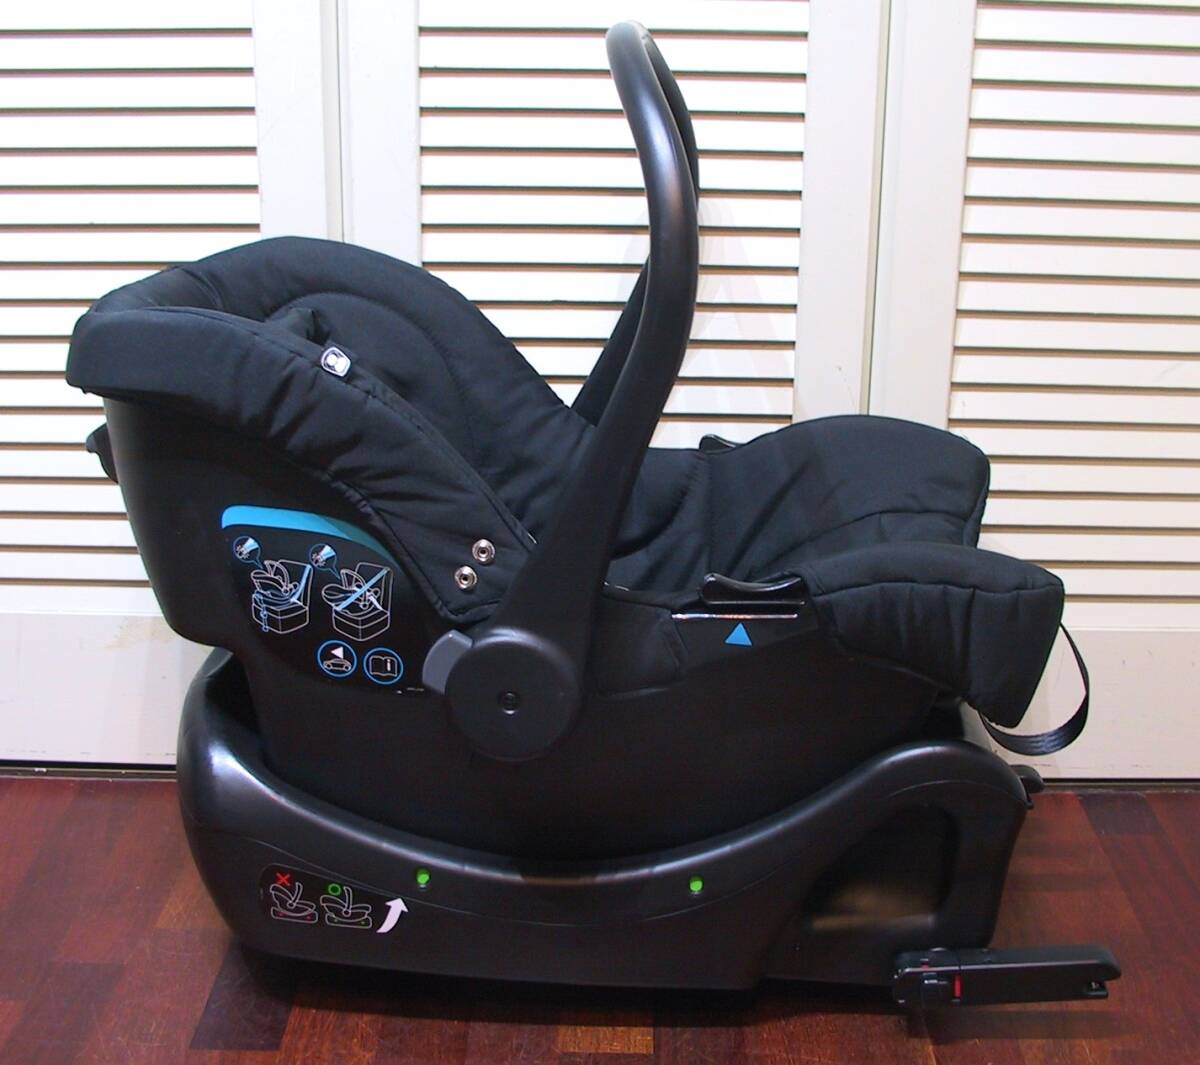 Joie Joy -Juvajuba+i-Base I base ISOFIX correspondence child seat & in fan to car seat to bell system correspondence cleaning settled beautiful goods 